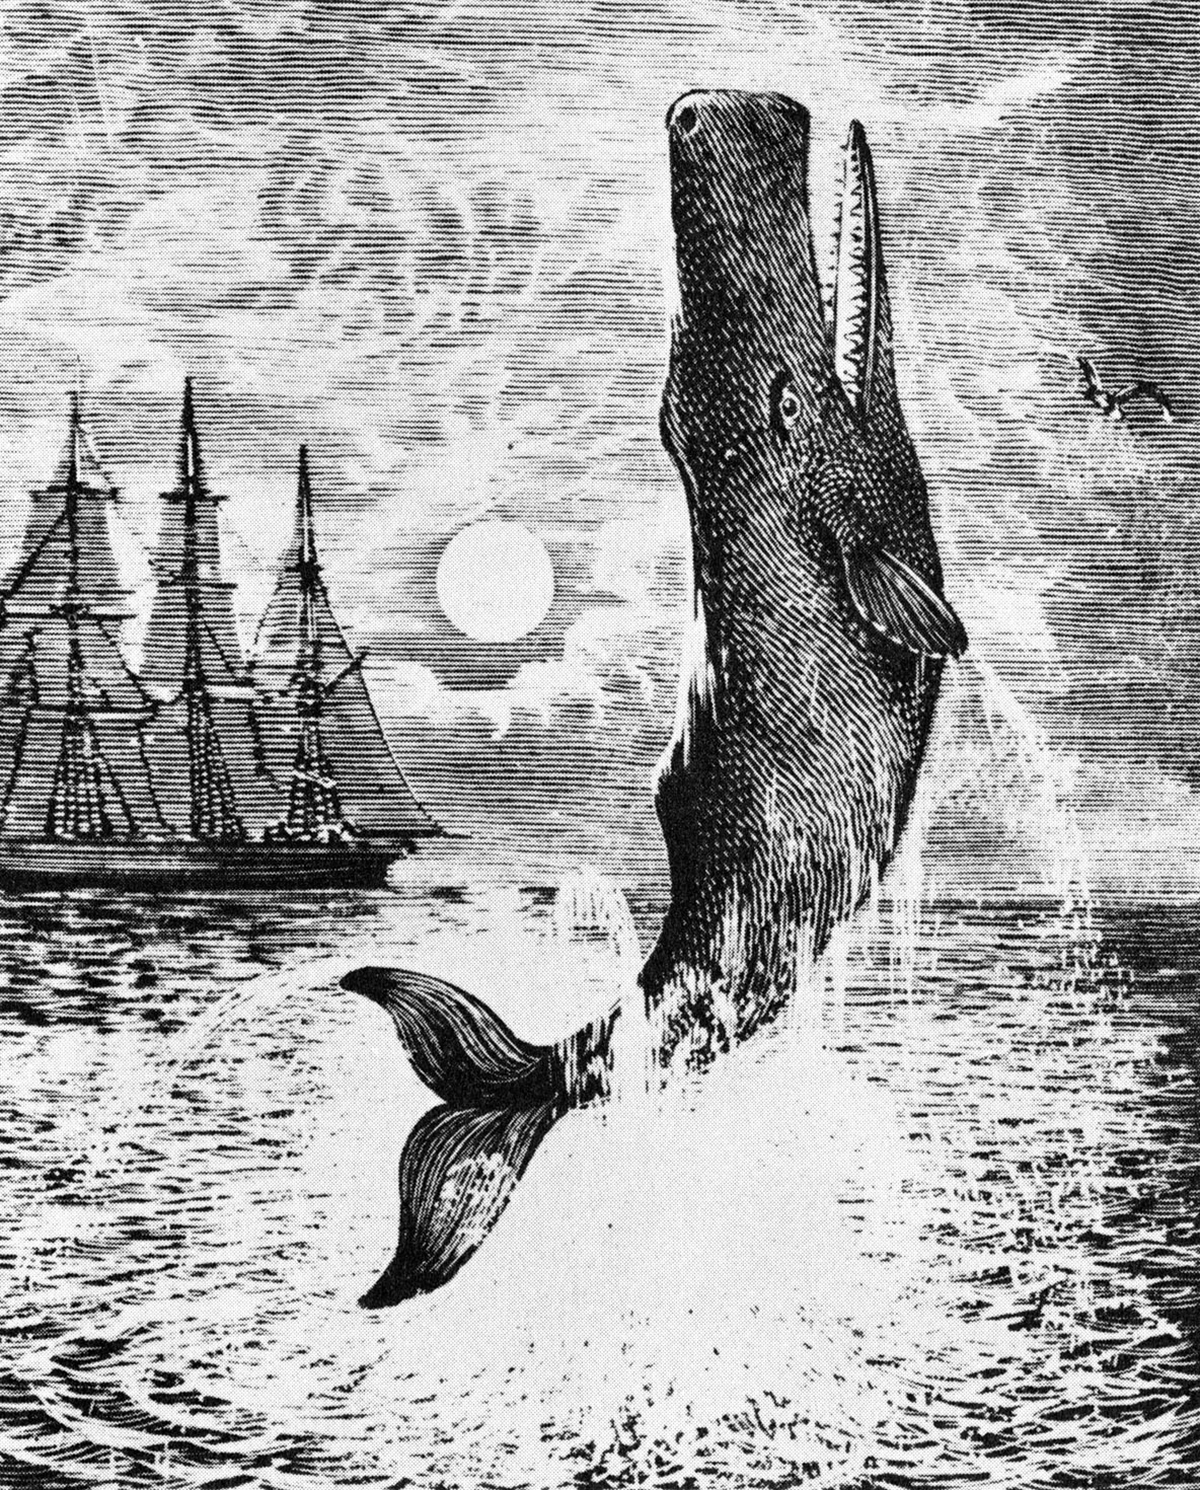 Illustration of Moby Dick from Herman Melville's novel 'Moby-Dick'.